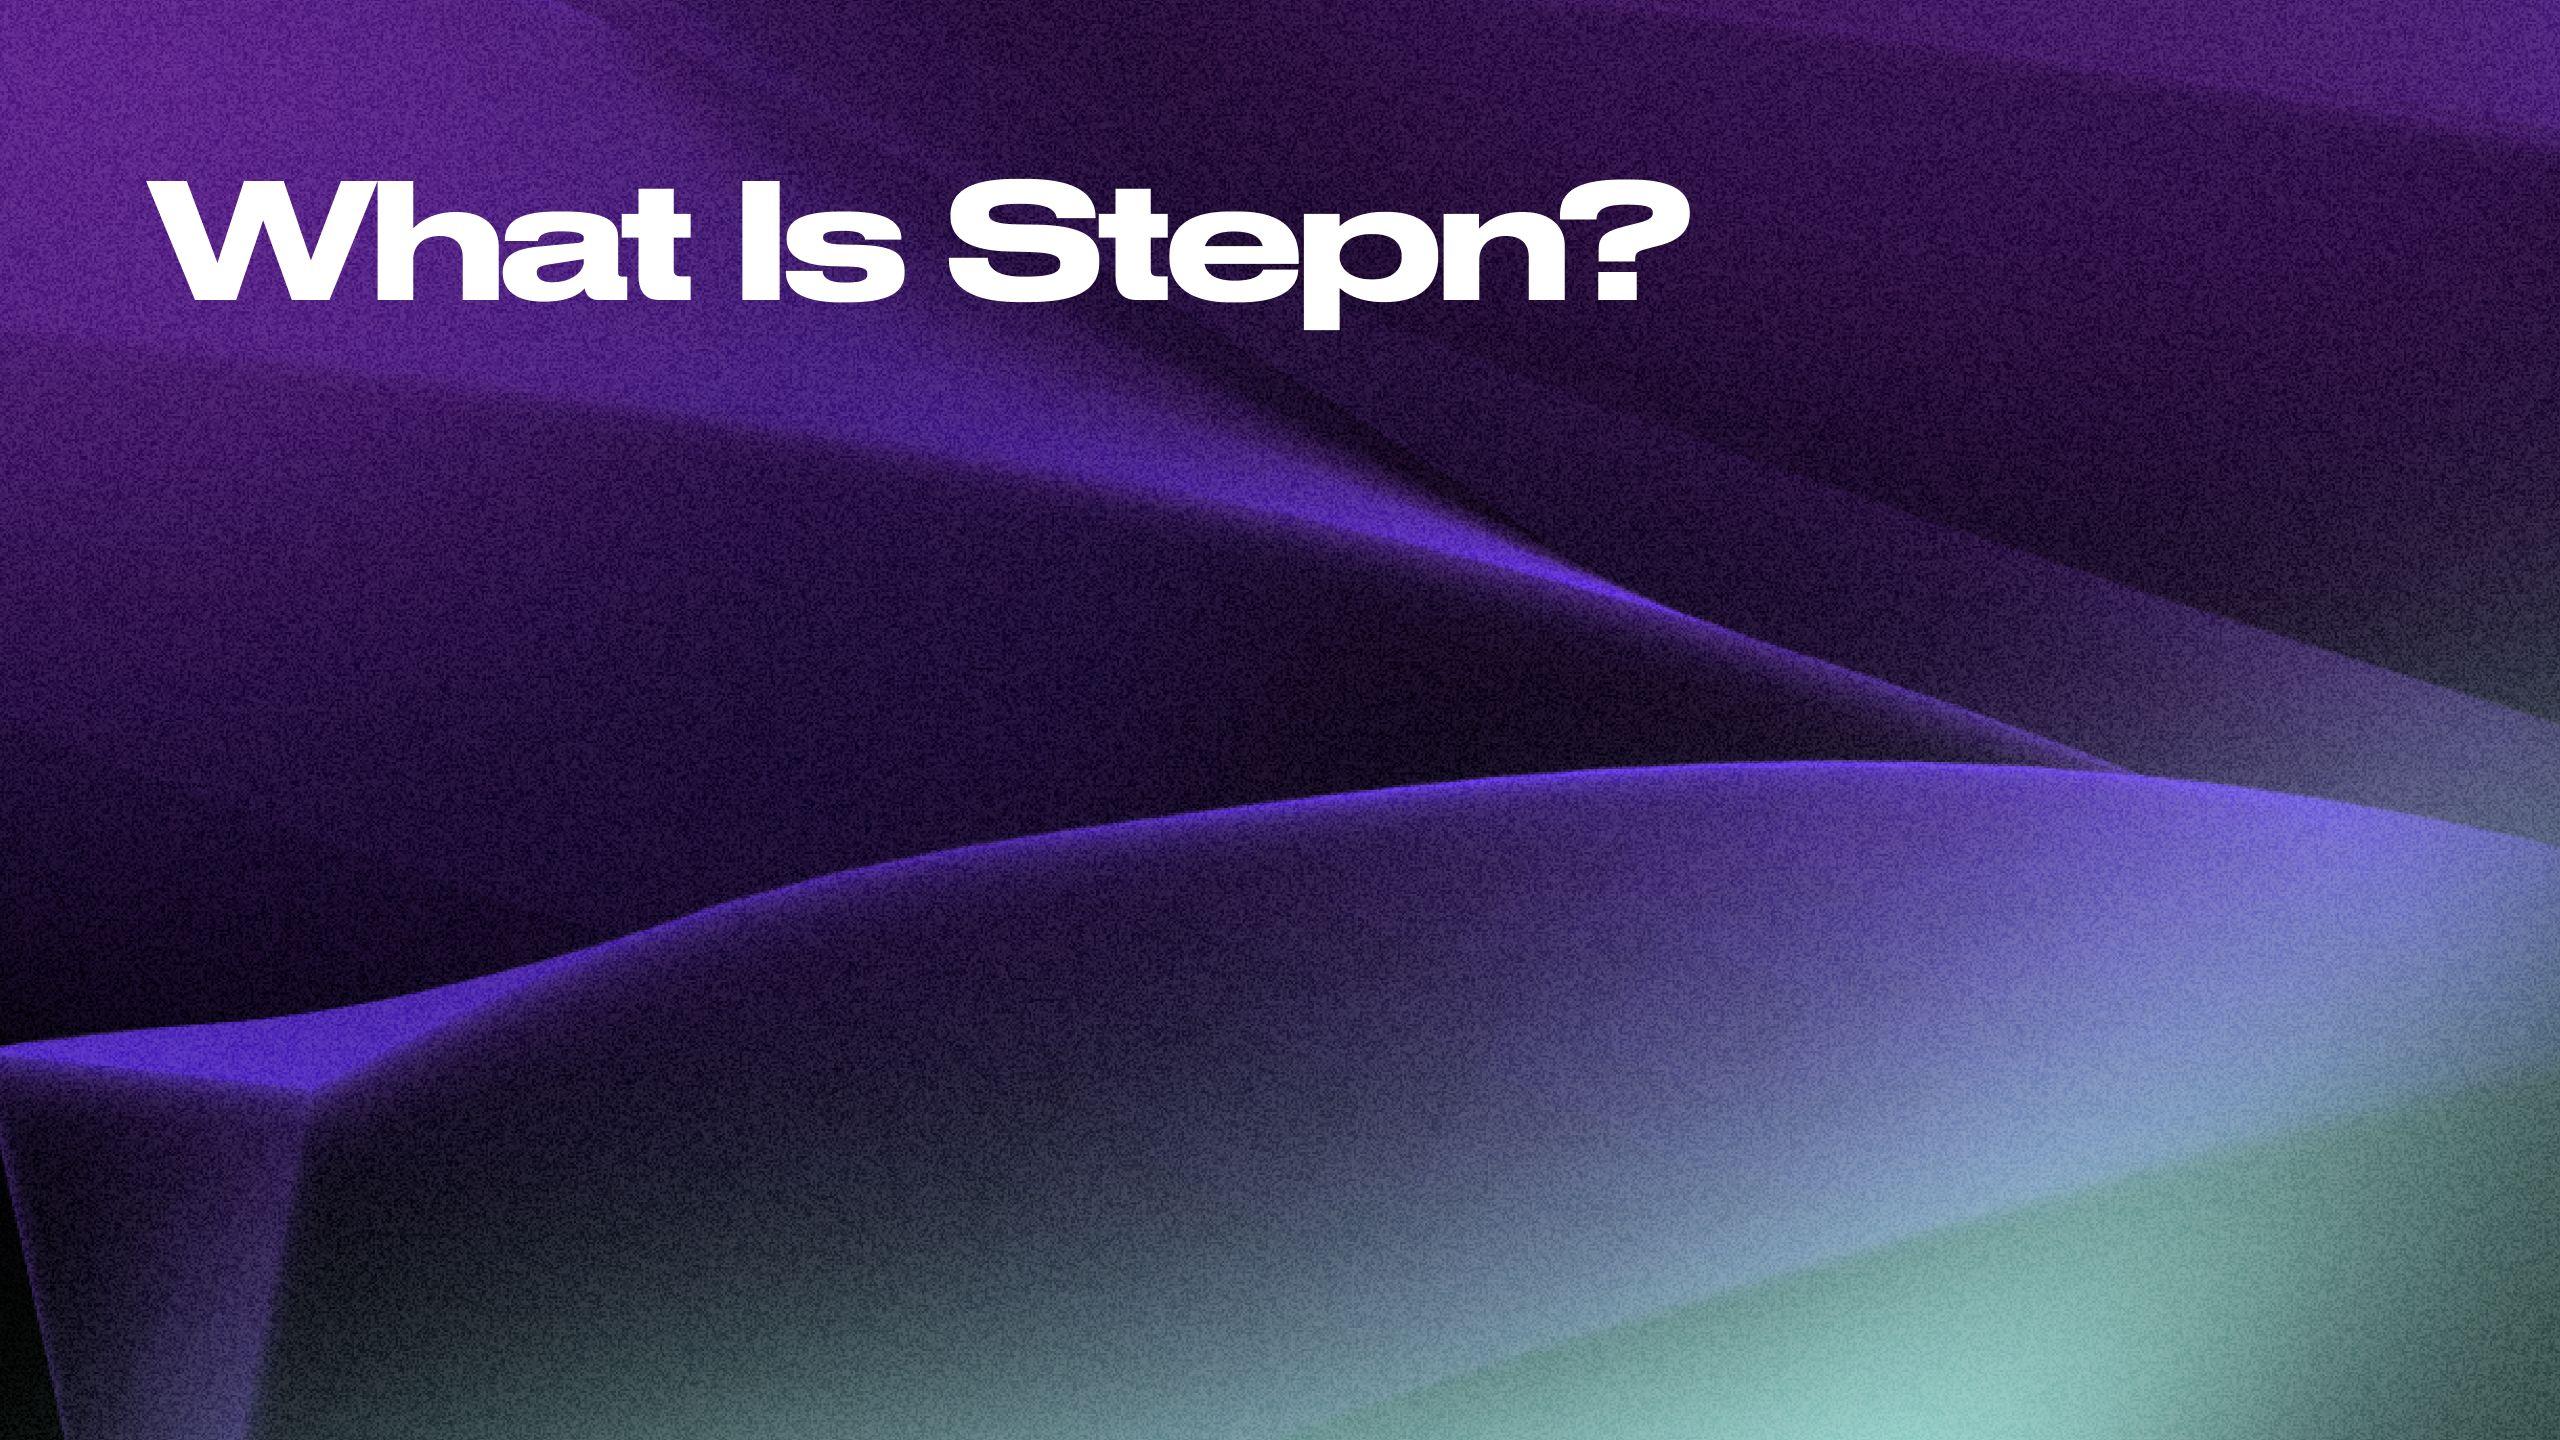 Discover more about STEPN's move-to-earn project